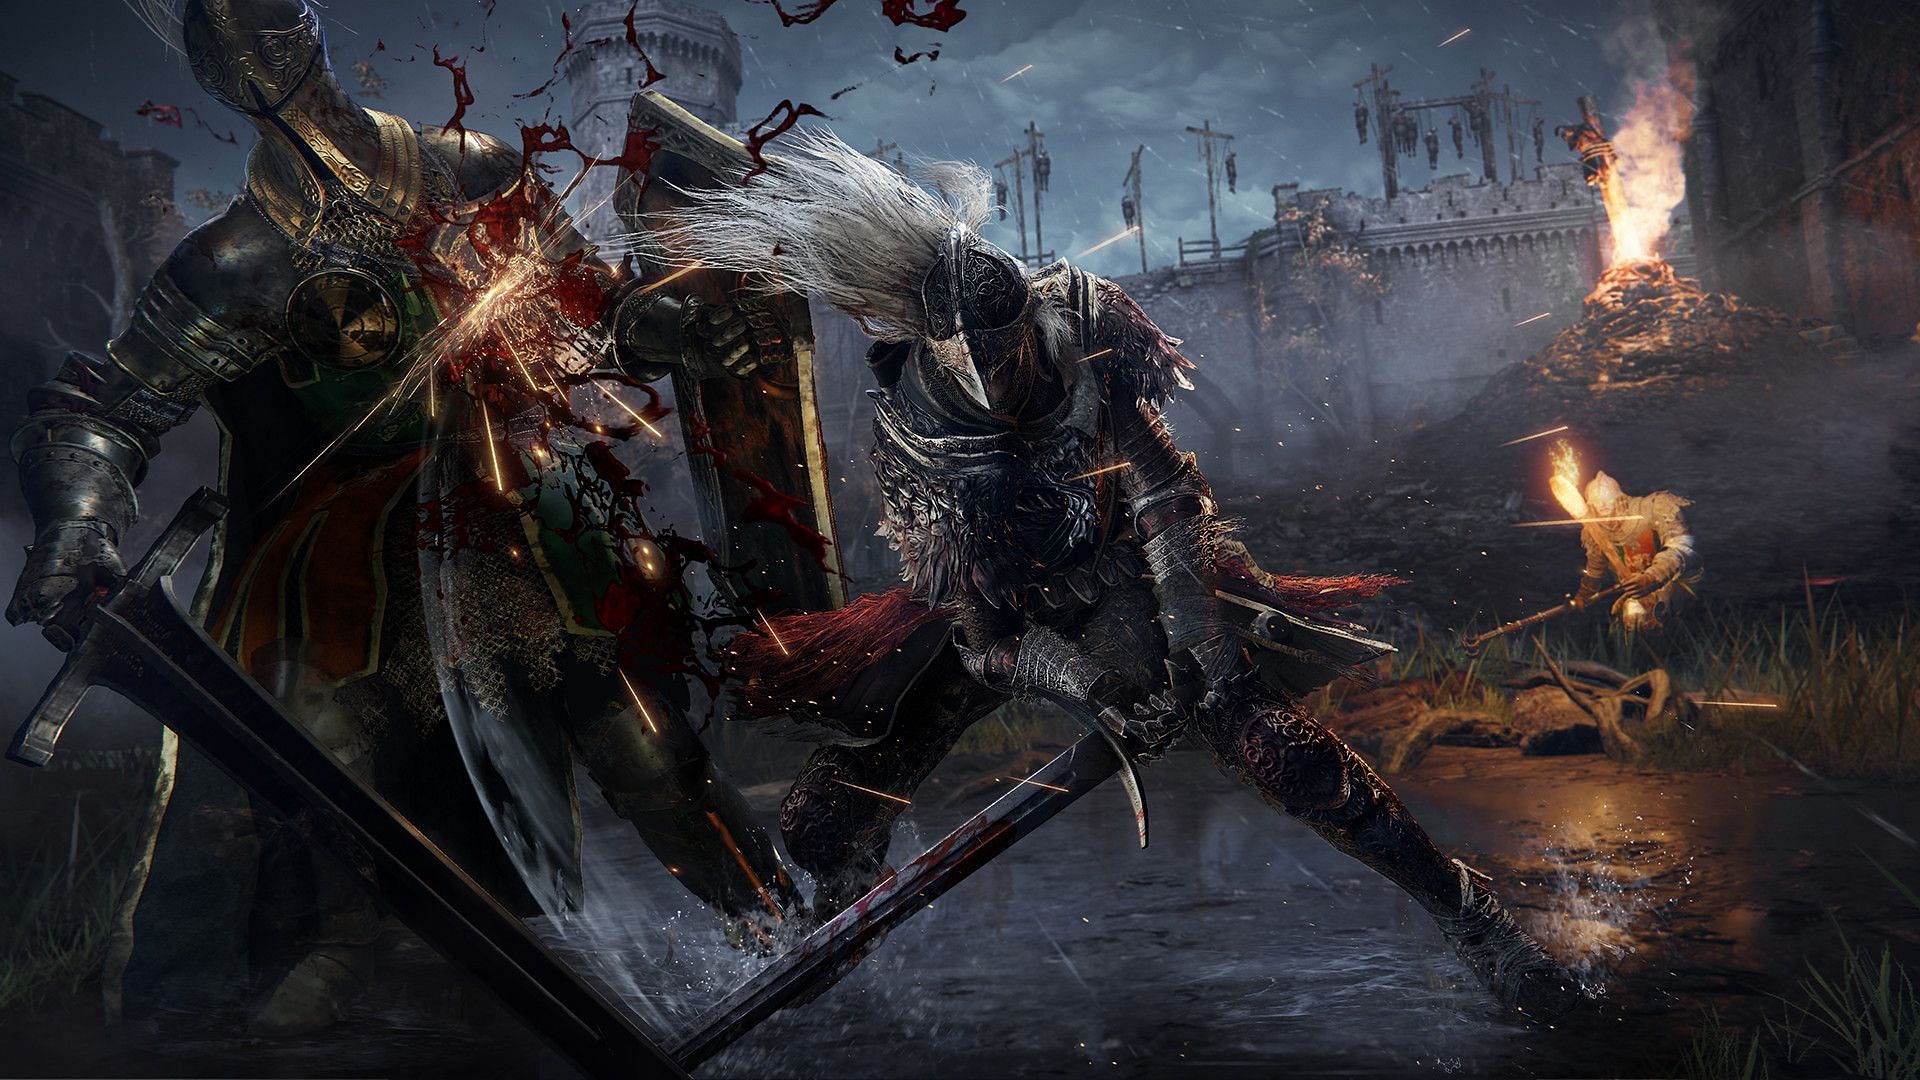 In Elden Ring, Cleanrot Knights can move quickly towards players by rushing them with an impale move, which can cause heavy damage if it lands (Image via FromSoftware Inc)